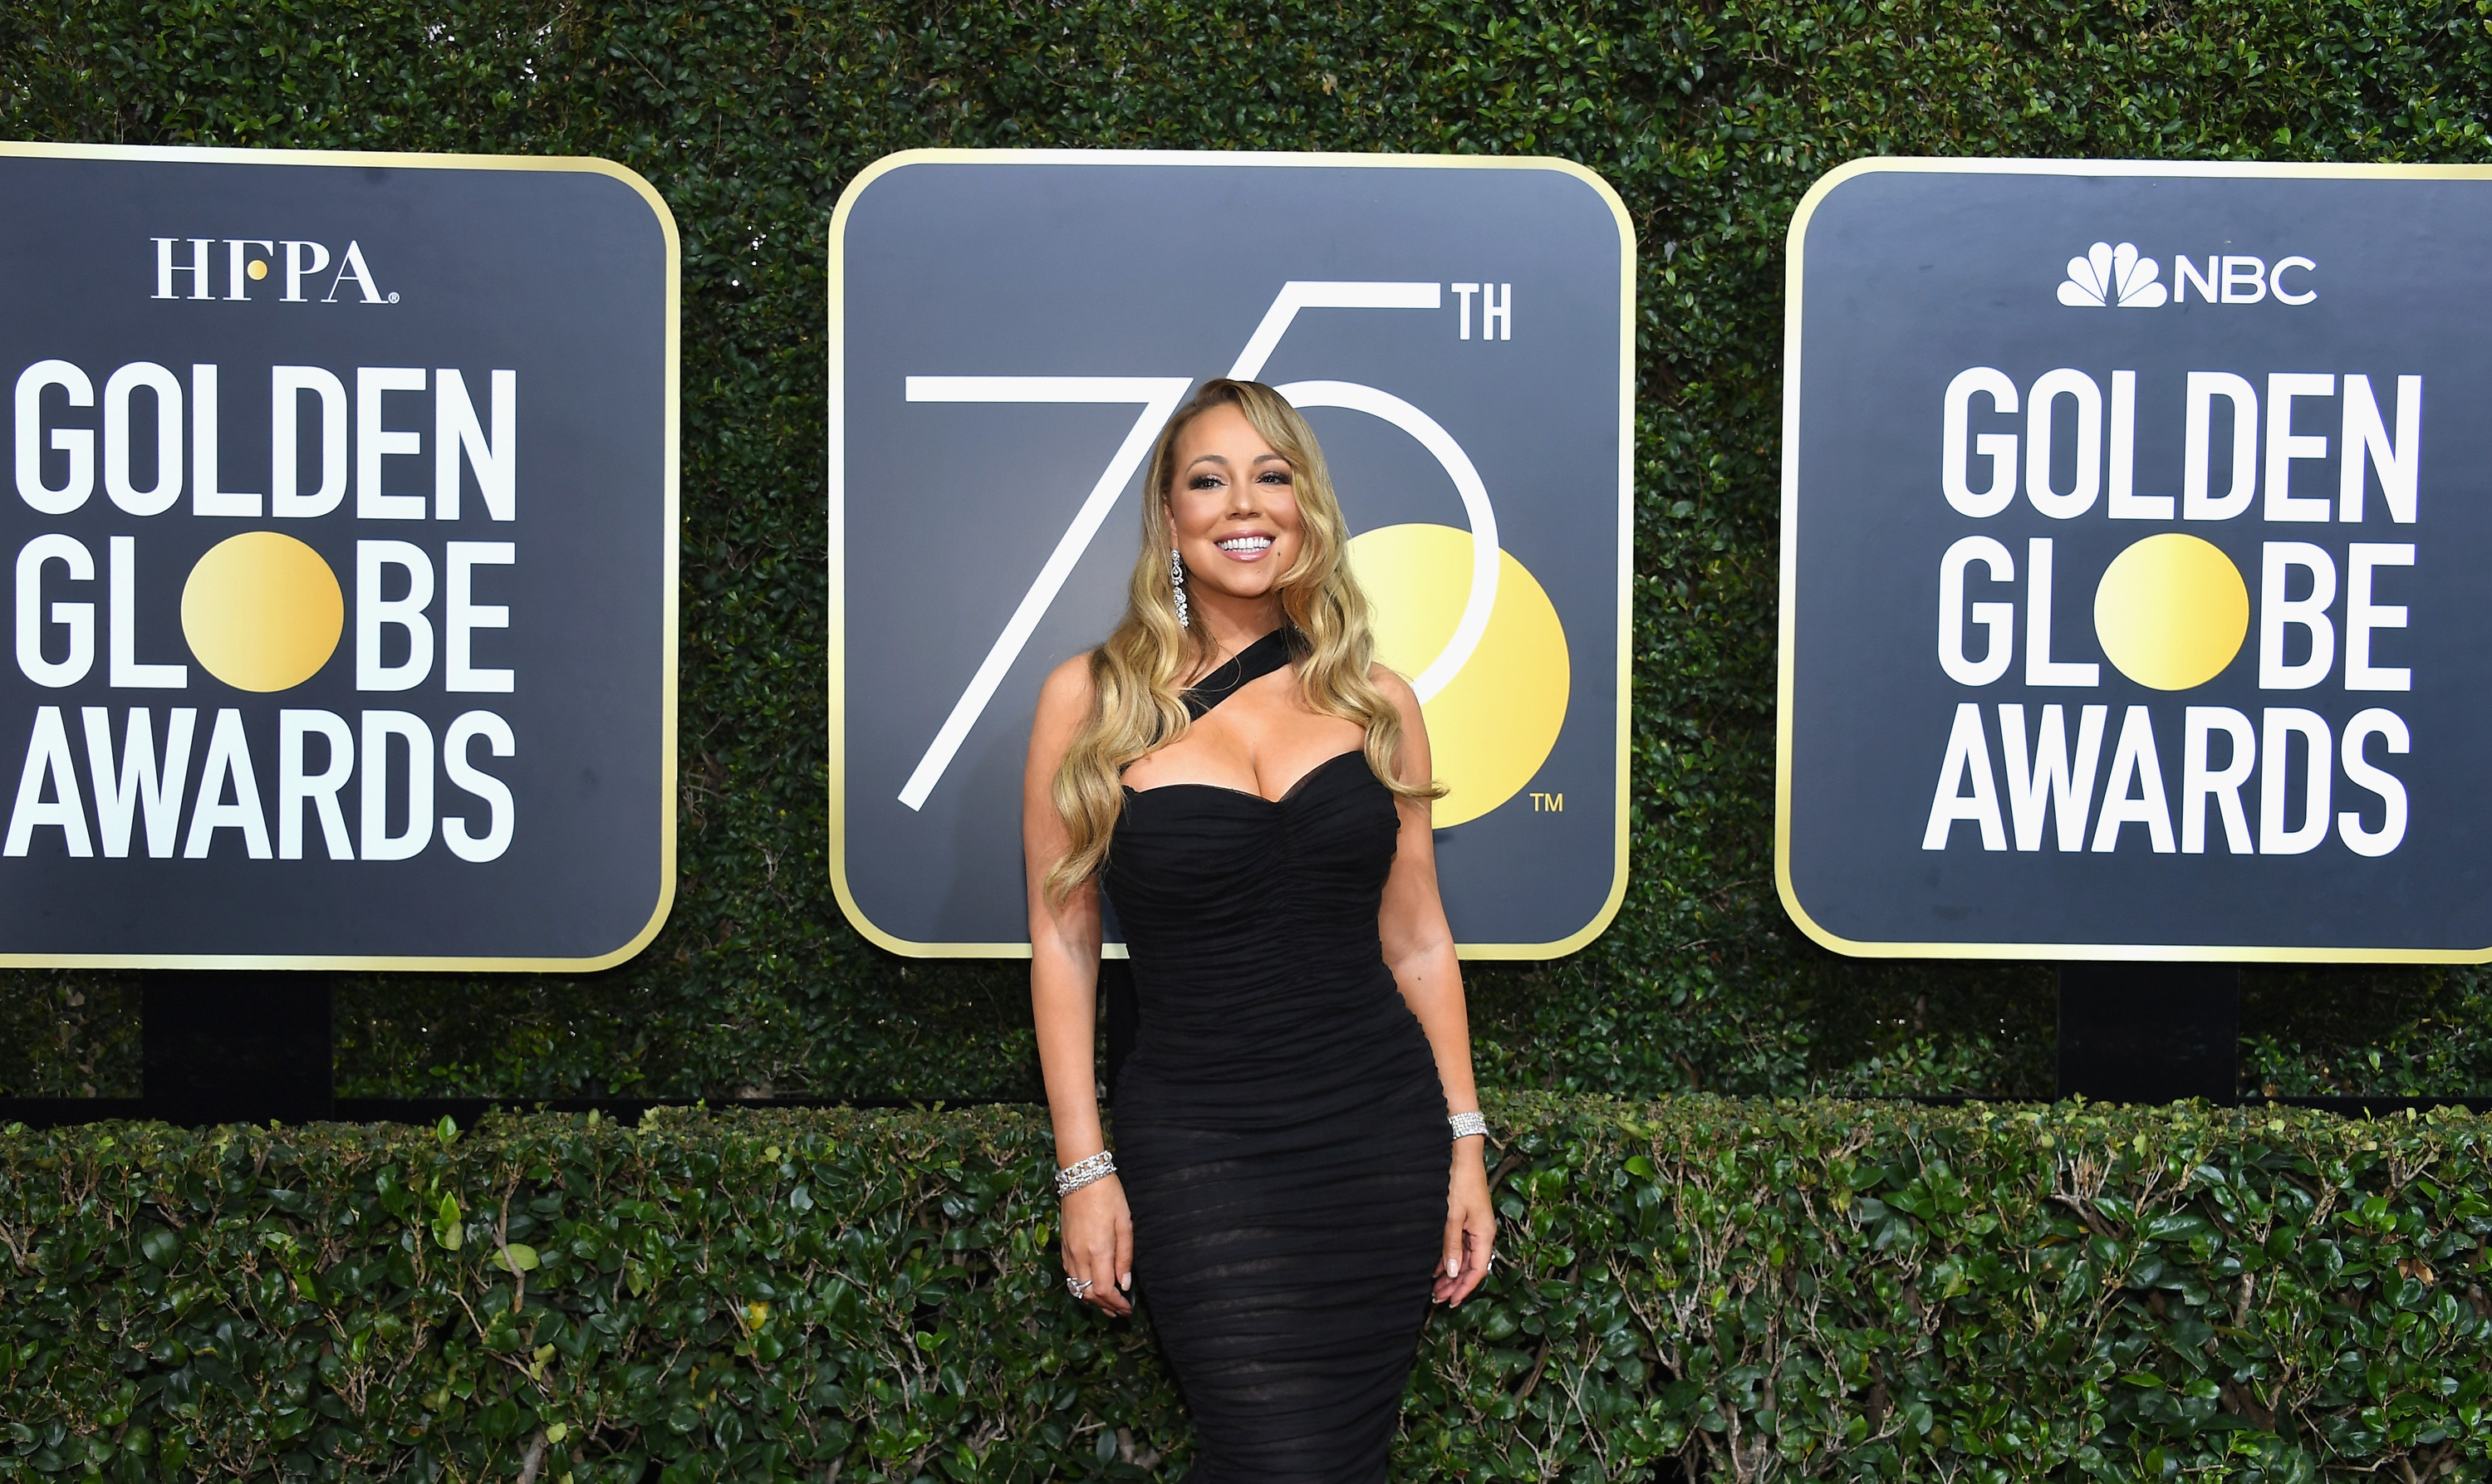 Singer Mariah Carey arrives to the 75th Annual Golden Globe Awards held at the Beverly Hilton Hotel on January 7, 2018. (Kevork Djansezian/NBC—NBCU Photo Bank via Getty Images via Getty Images)